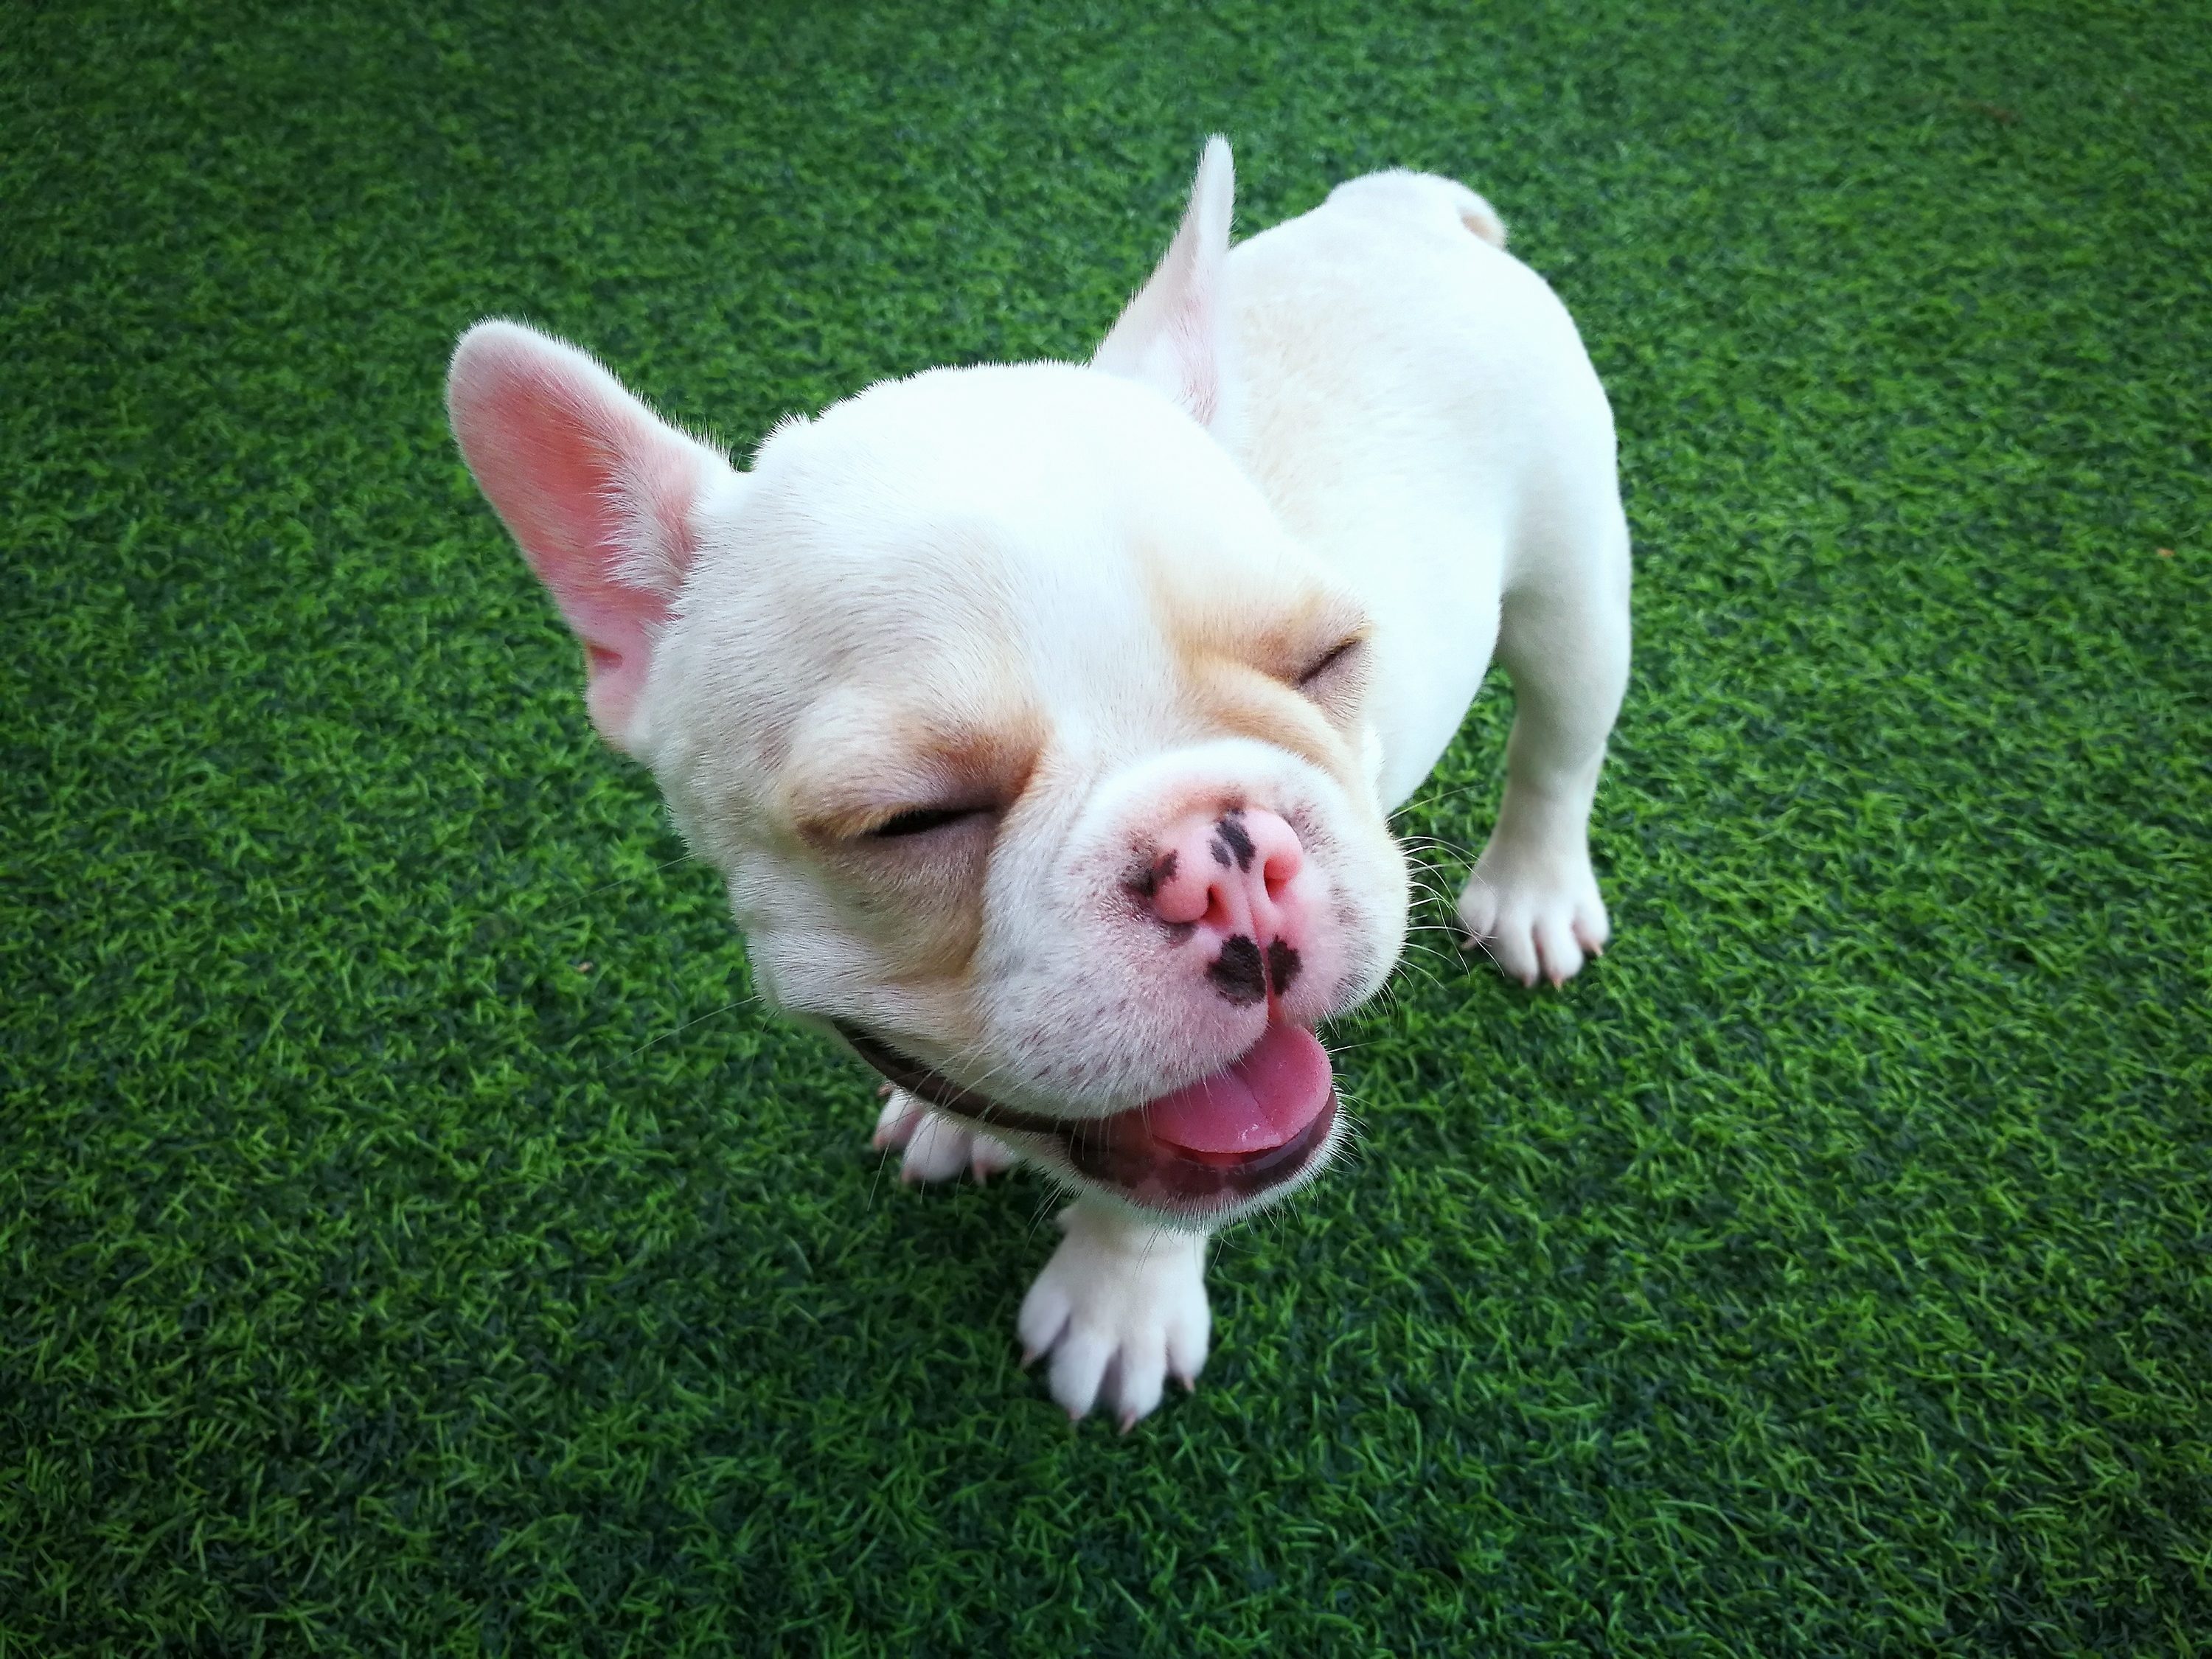 Artificial Turf Maintenance Tips for Muddy Paws & More!